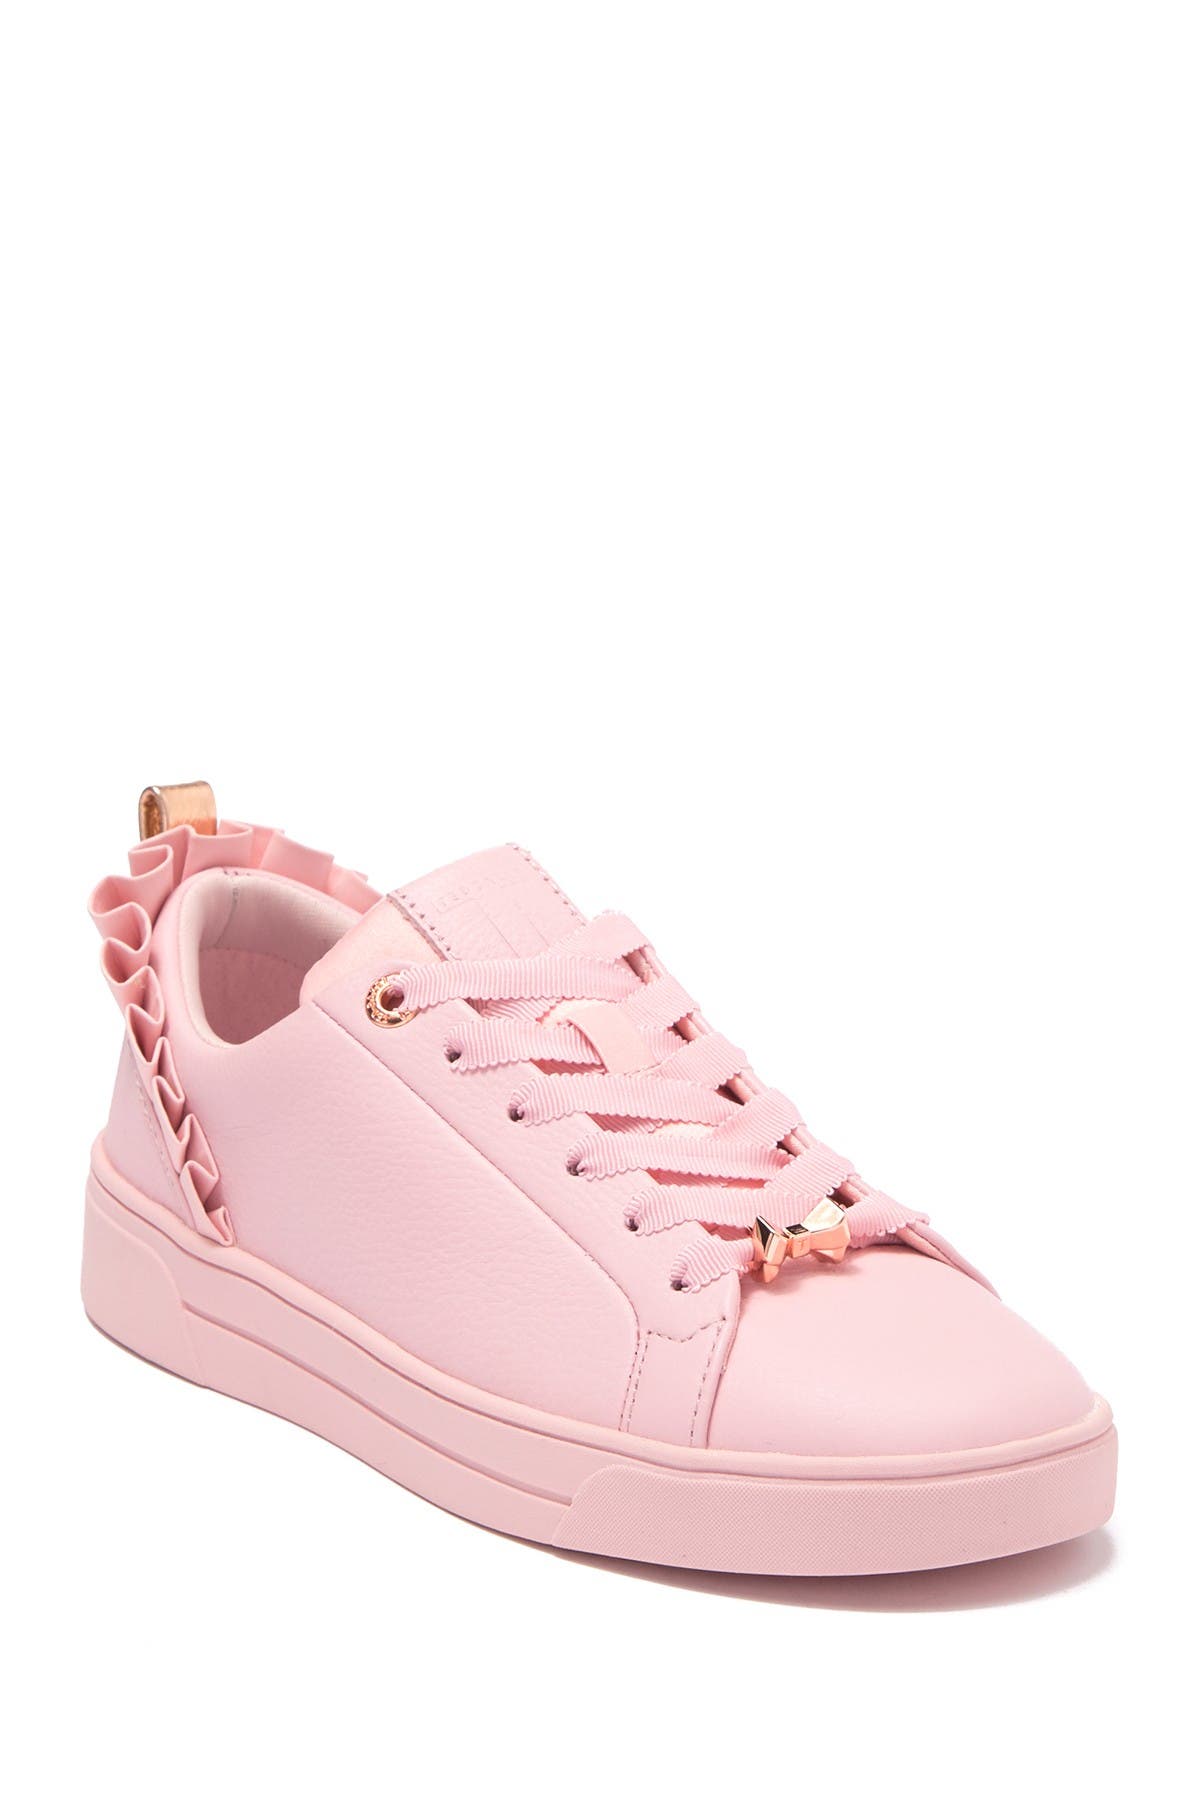 ted baker astrina pink